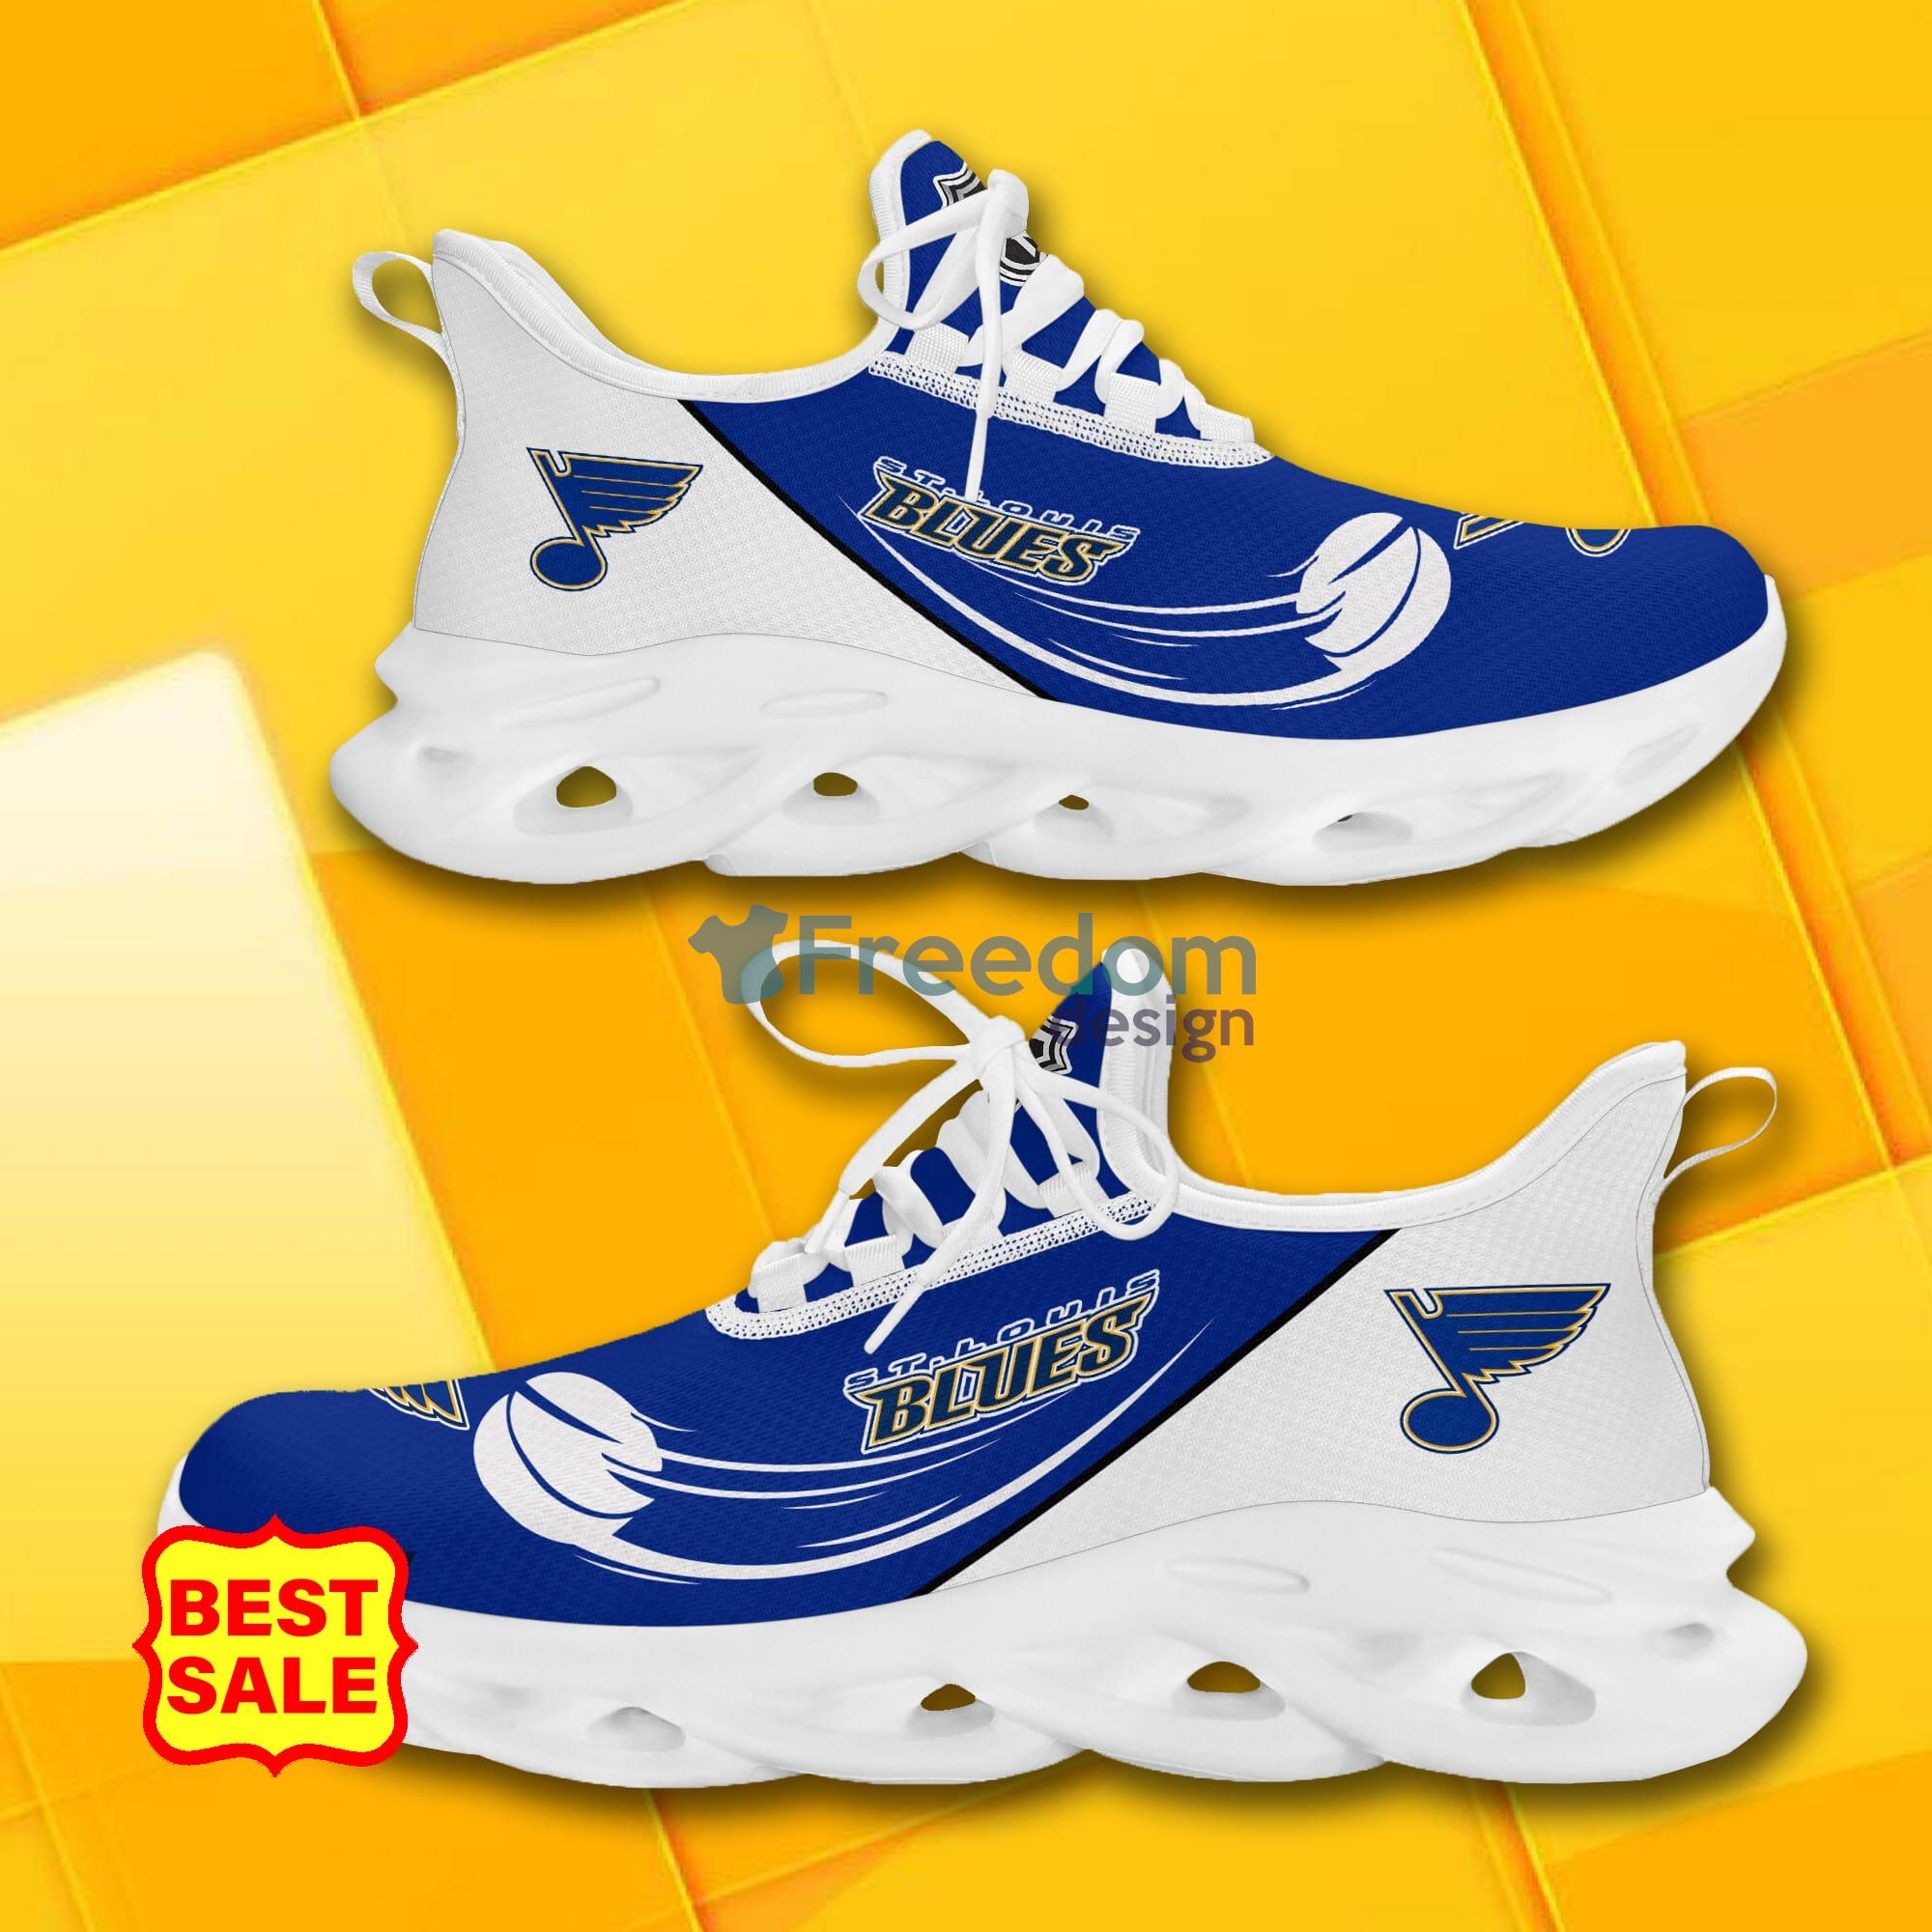 St Louis Blues Team Air Shoes Sneakers For Fans - Freedomdesign